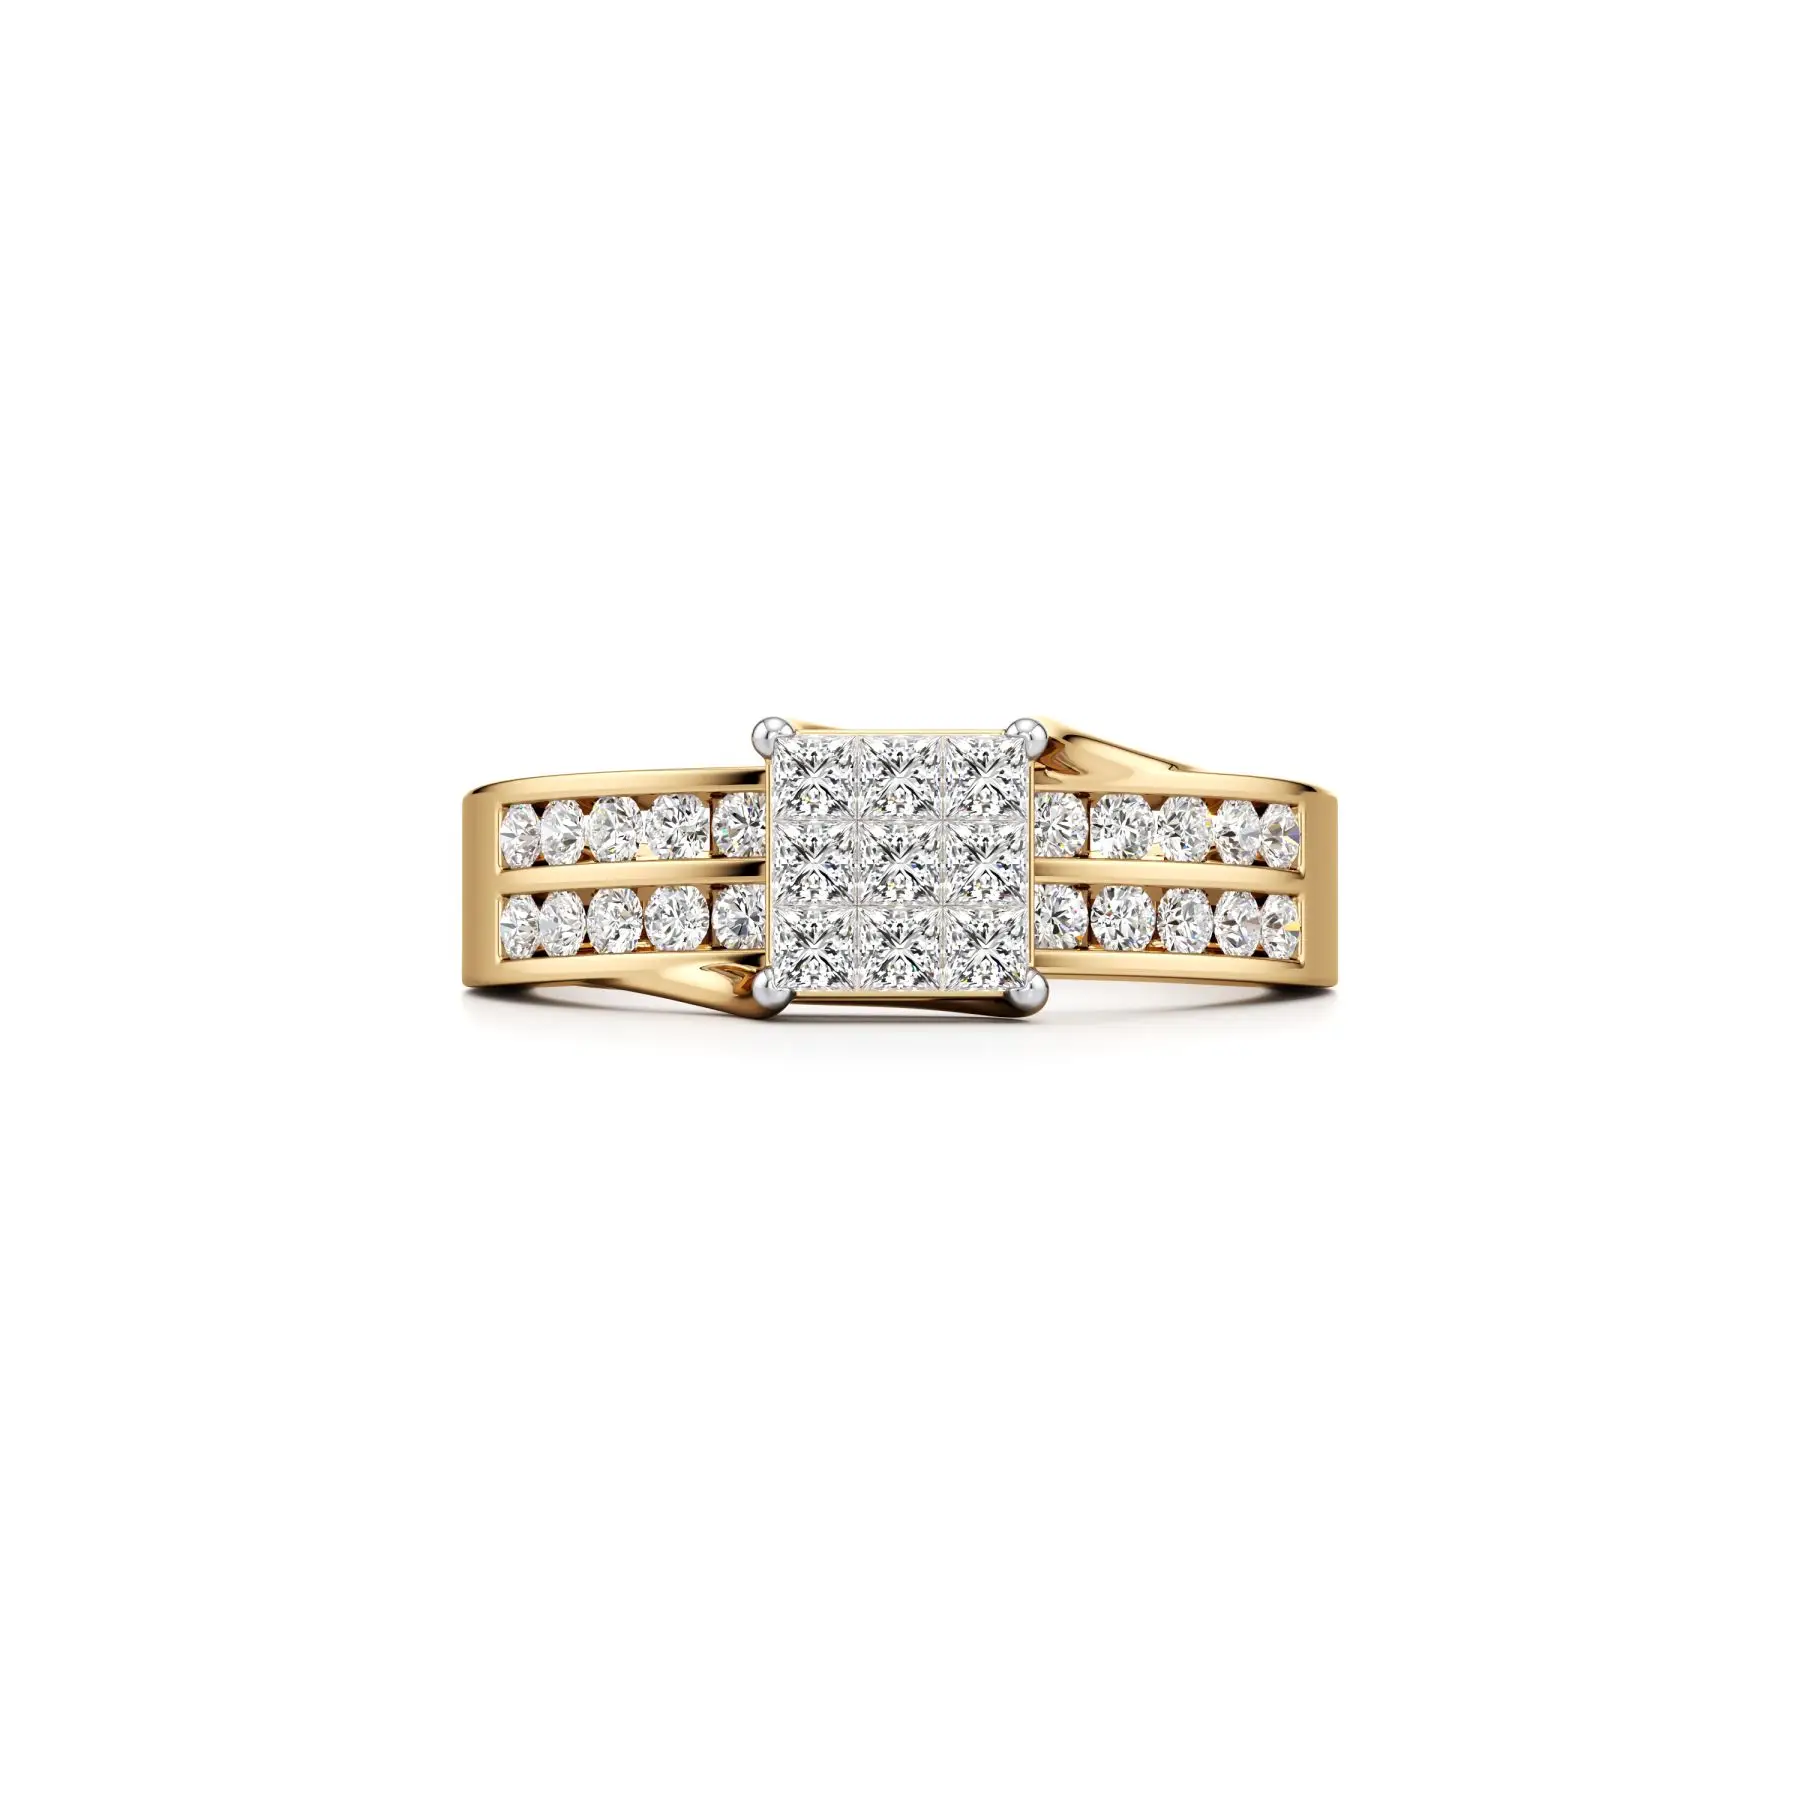 Icy Queen Diamond Ring in Yellow 10k Gold